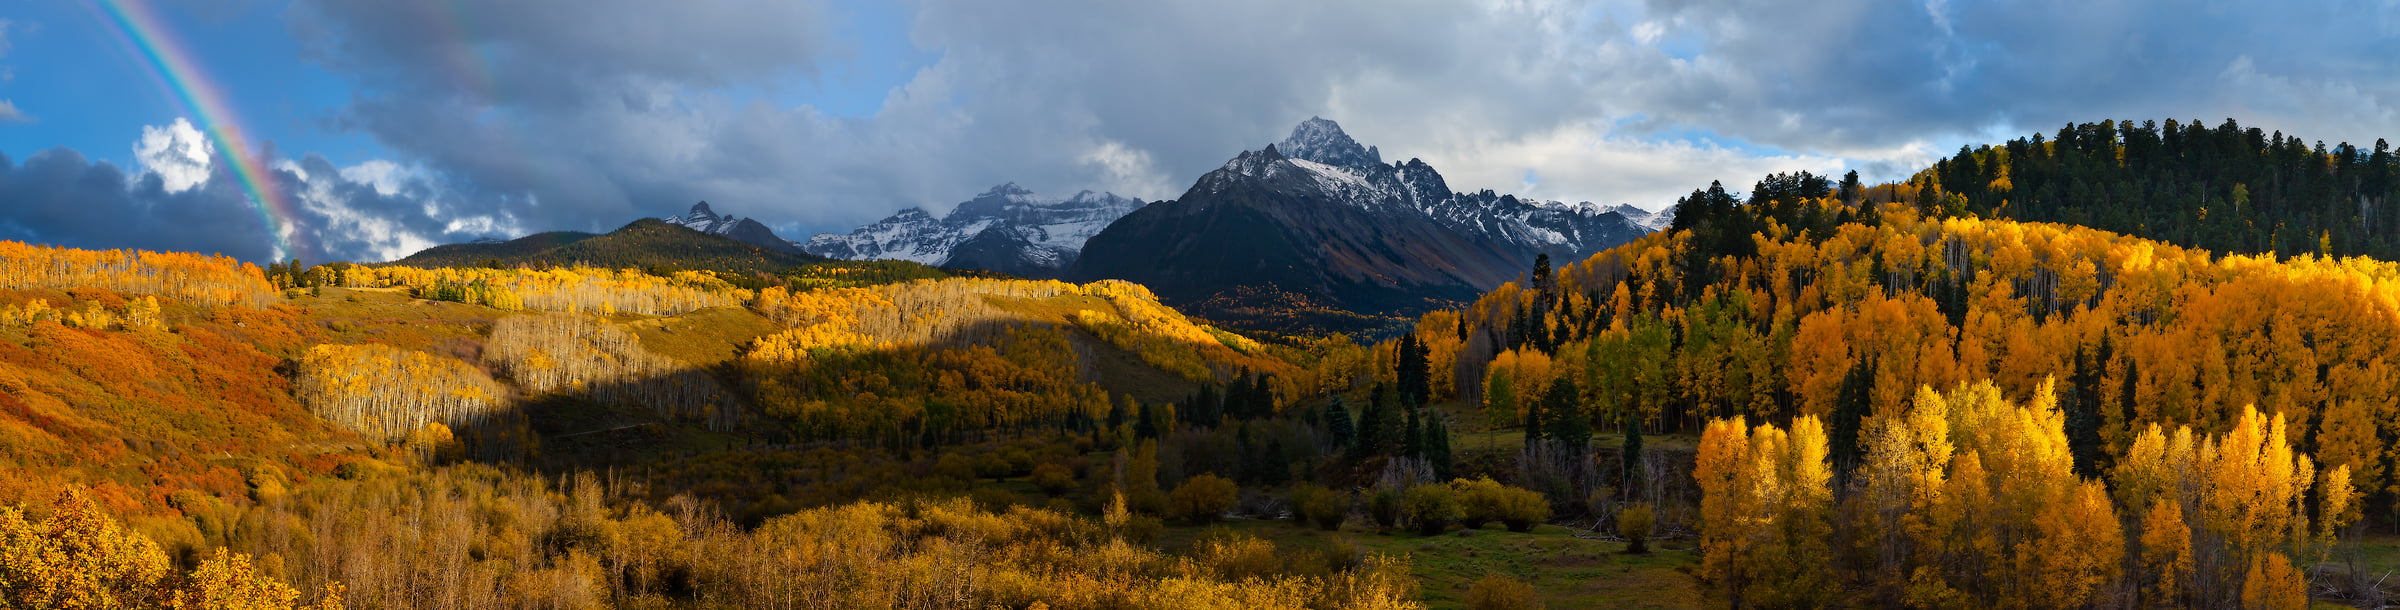 108 megapixels! A very high resolution, large-format VAST photo print of an autumn landscape with forests, mountains, and a rainbow; photograph created by Phillip Noll in Ridgway, Colorado.